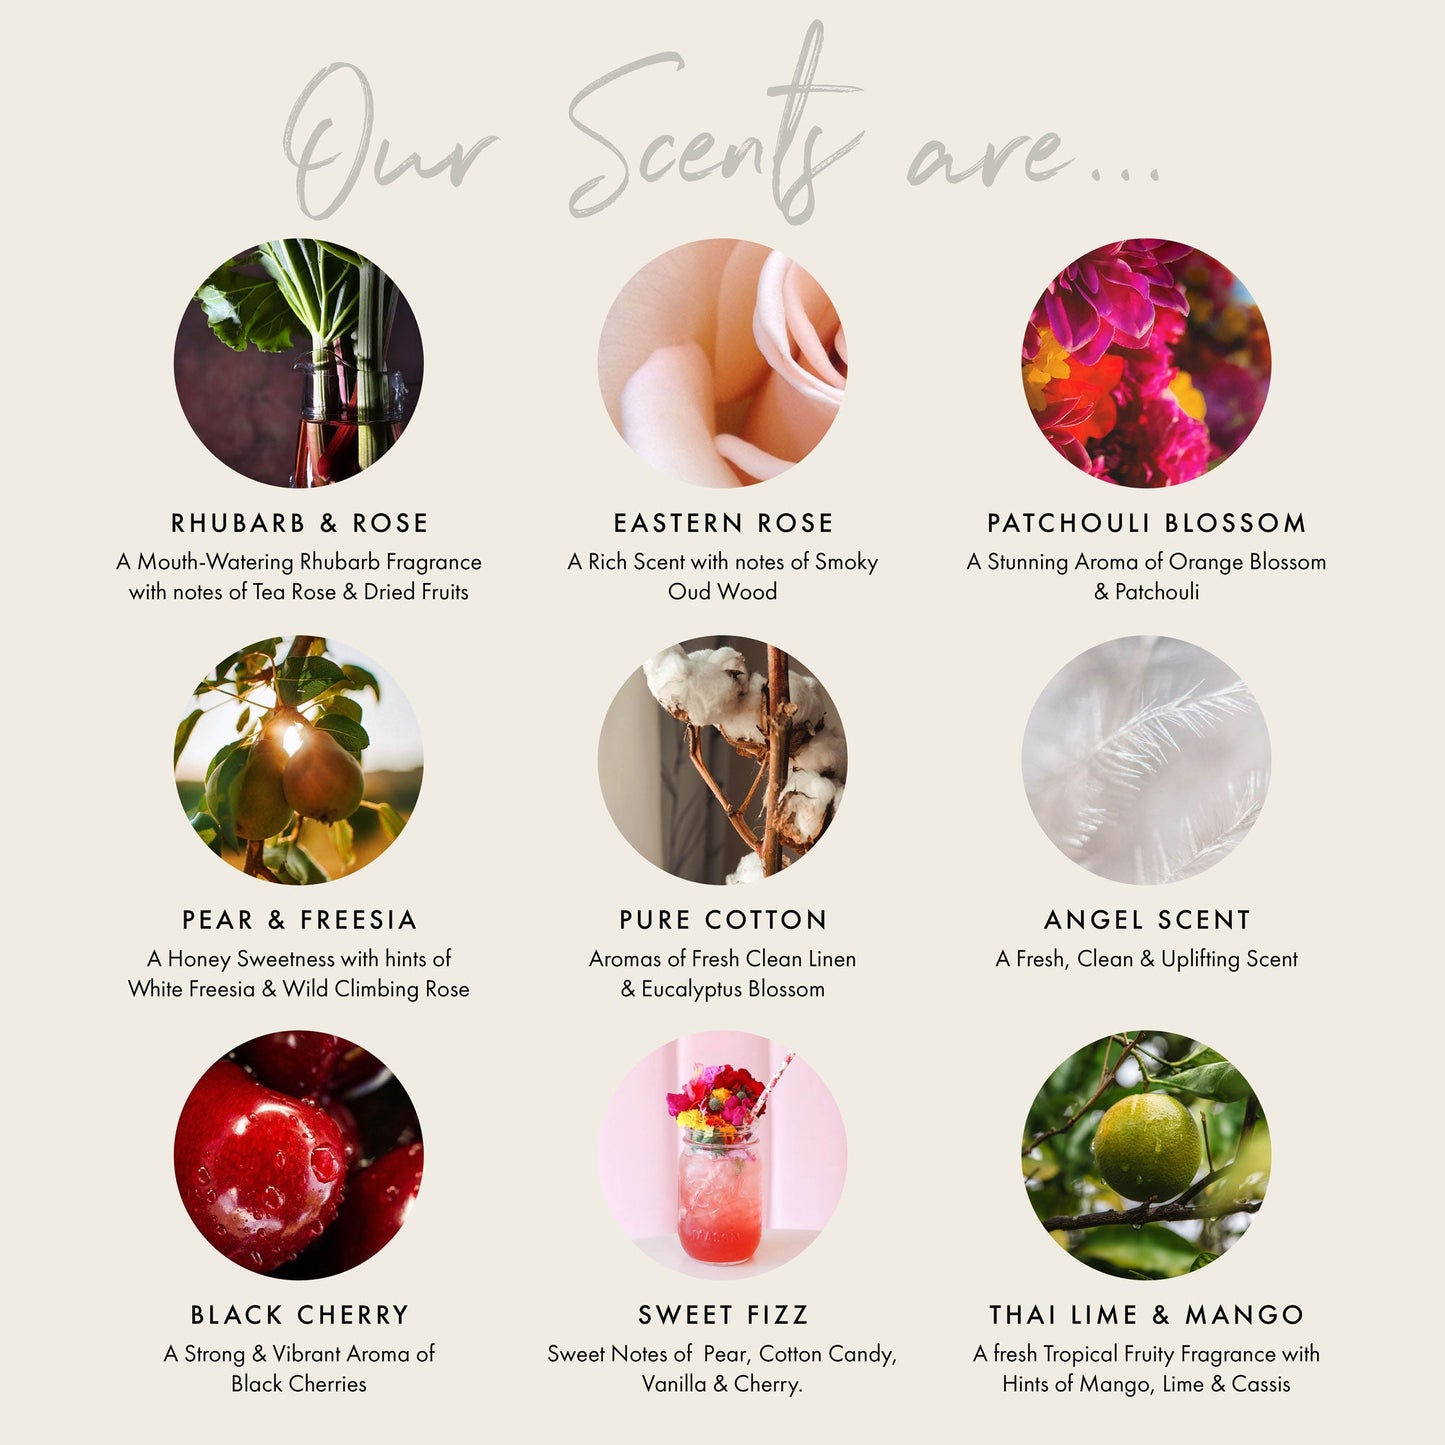 Fragrance choices, rhubarb and rose, Eastern rose, patchouli blossom, pear and freesia, pure cotton, angel scent, black cherry, sweet fizz, thai lime and mango